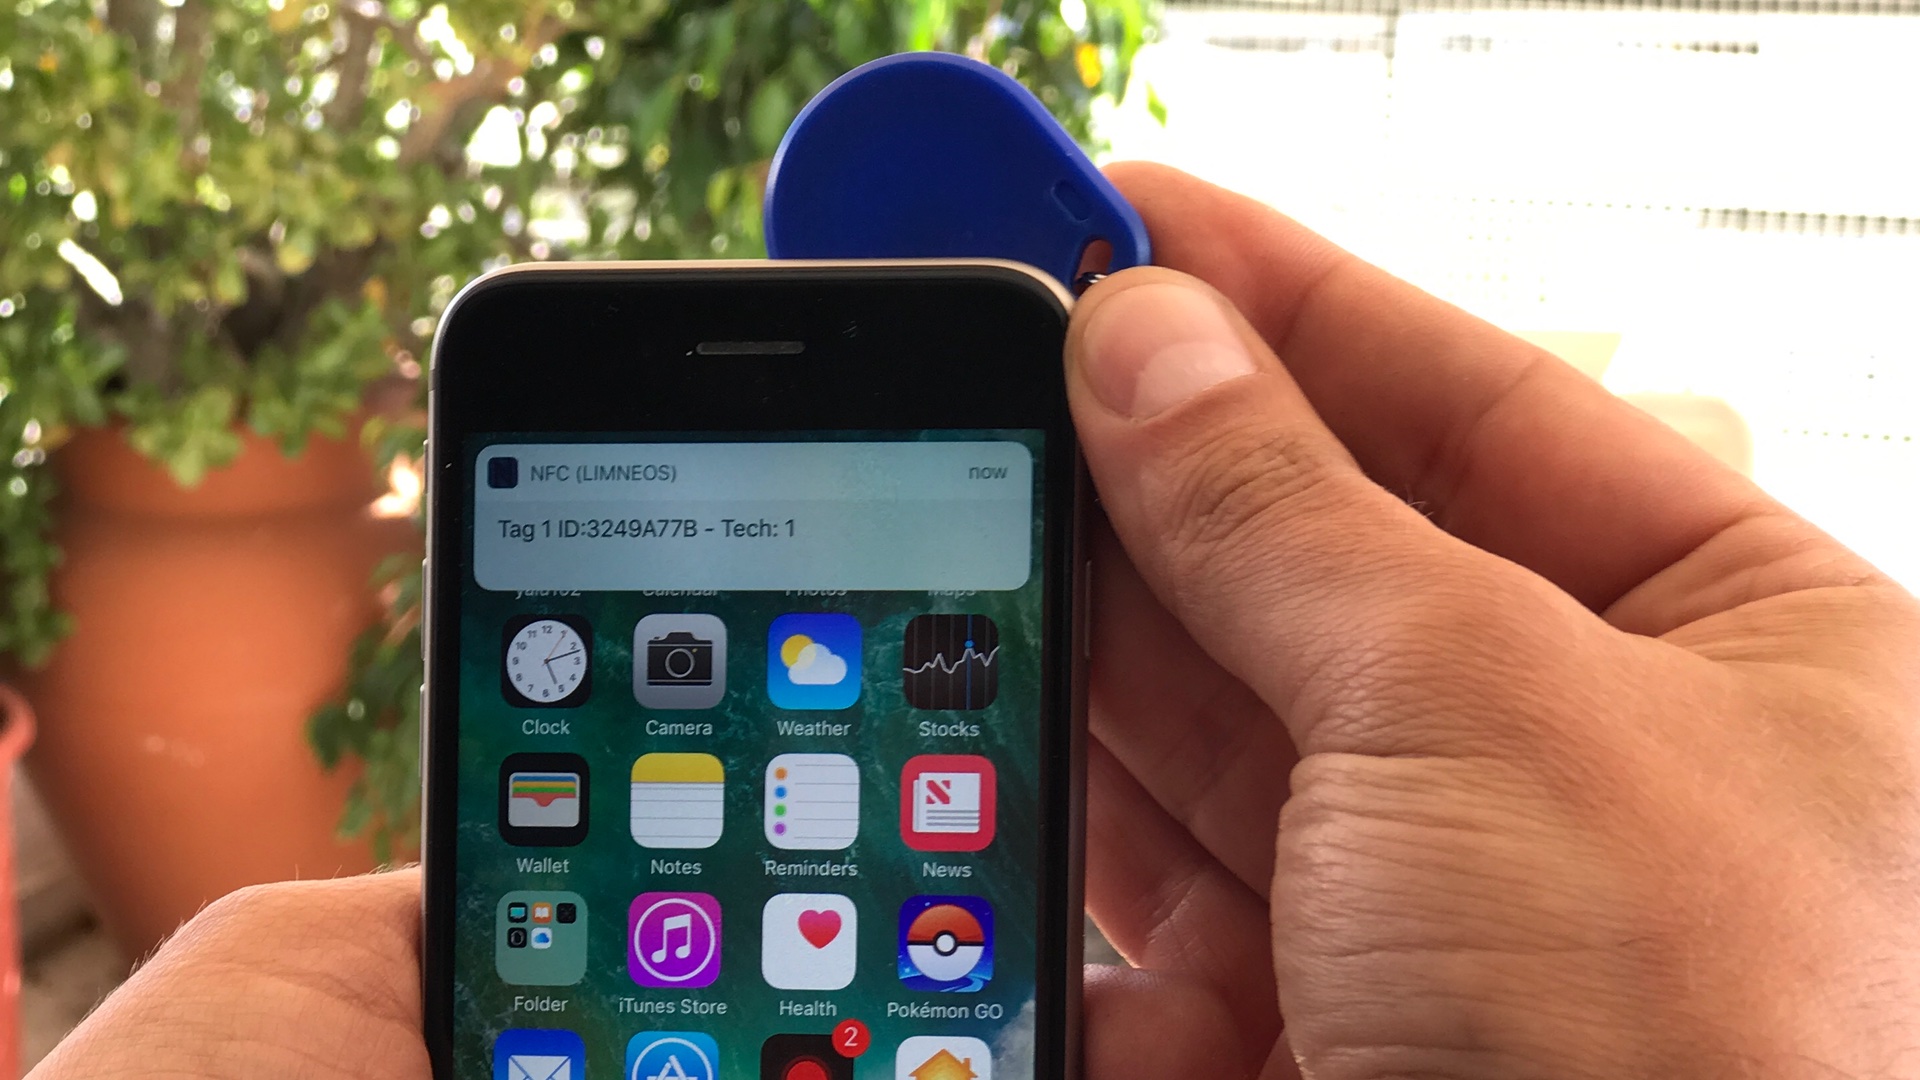 Jailbreak developer hacks NFC on iPhone 6s to talk to NFC devices 9to5Mac